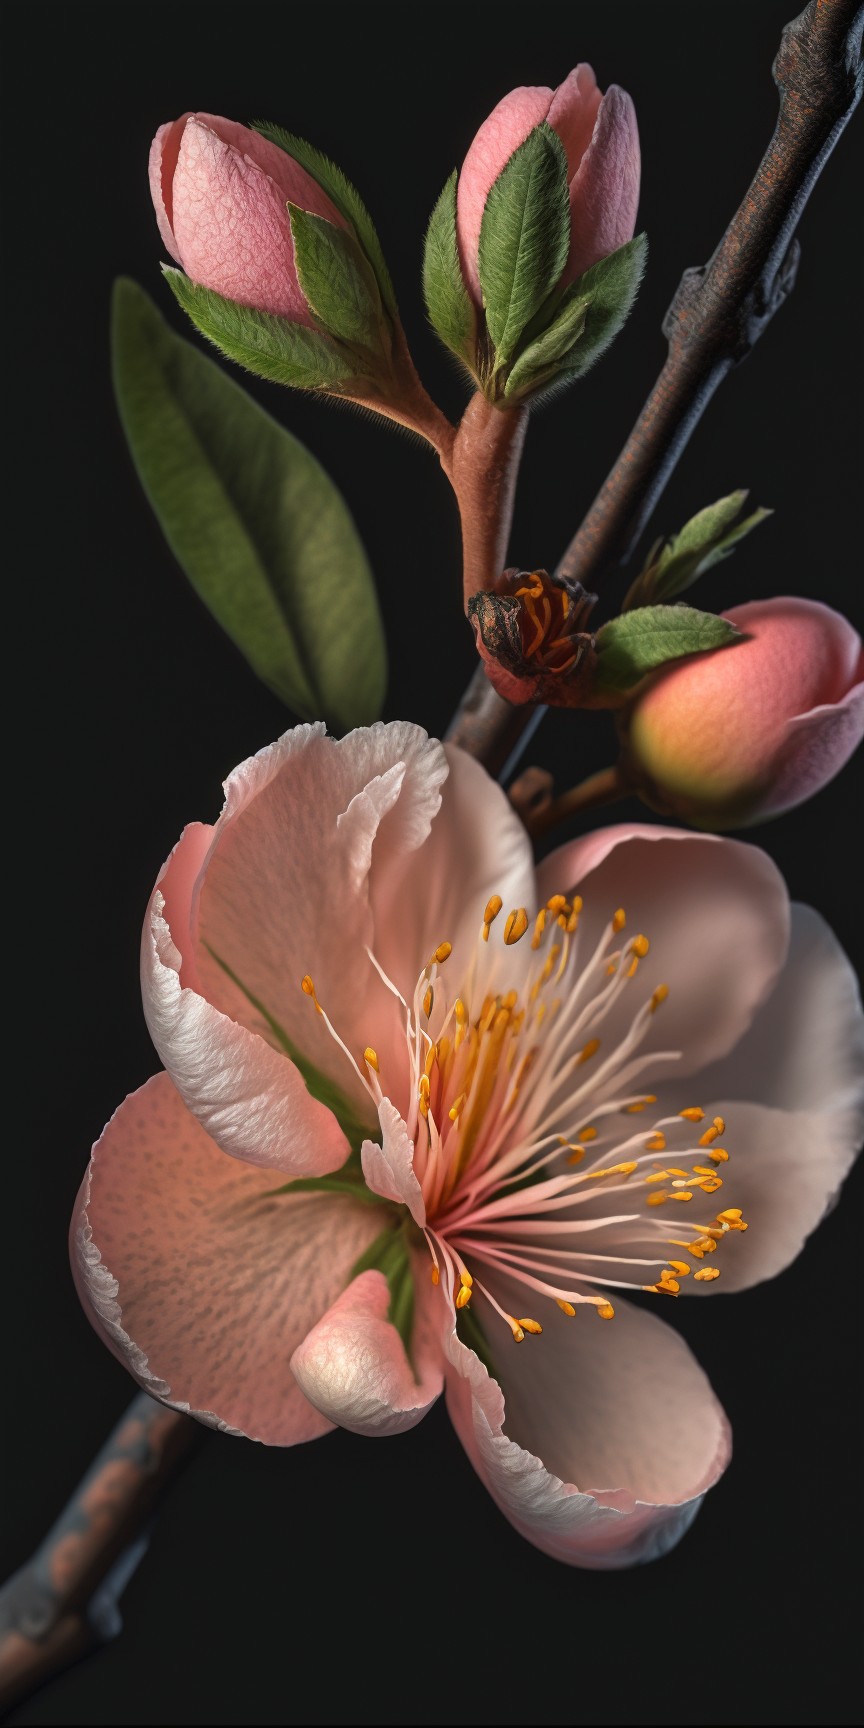 8 images of blooming peach blossom by Midjourney